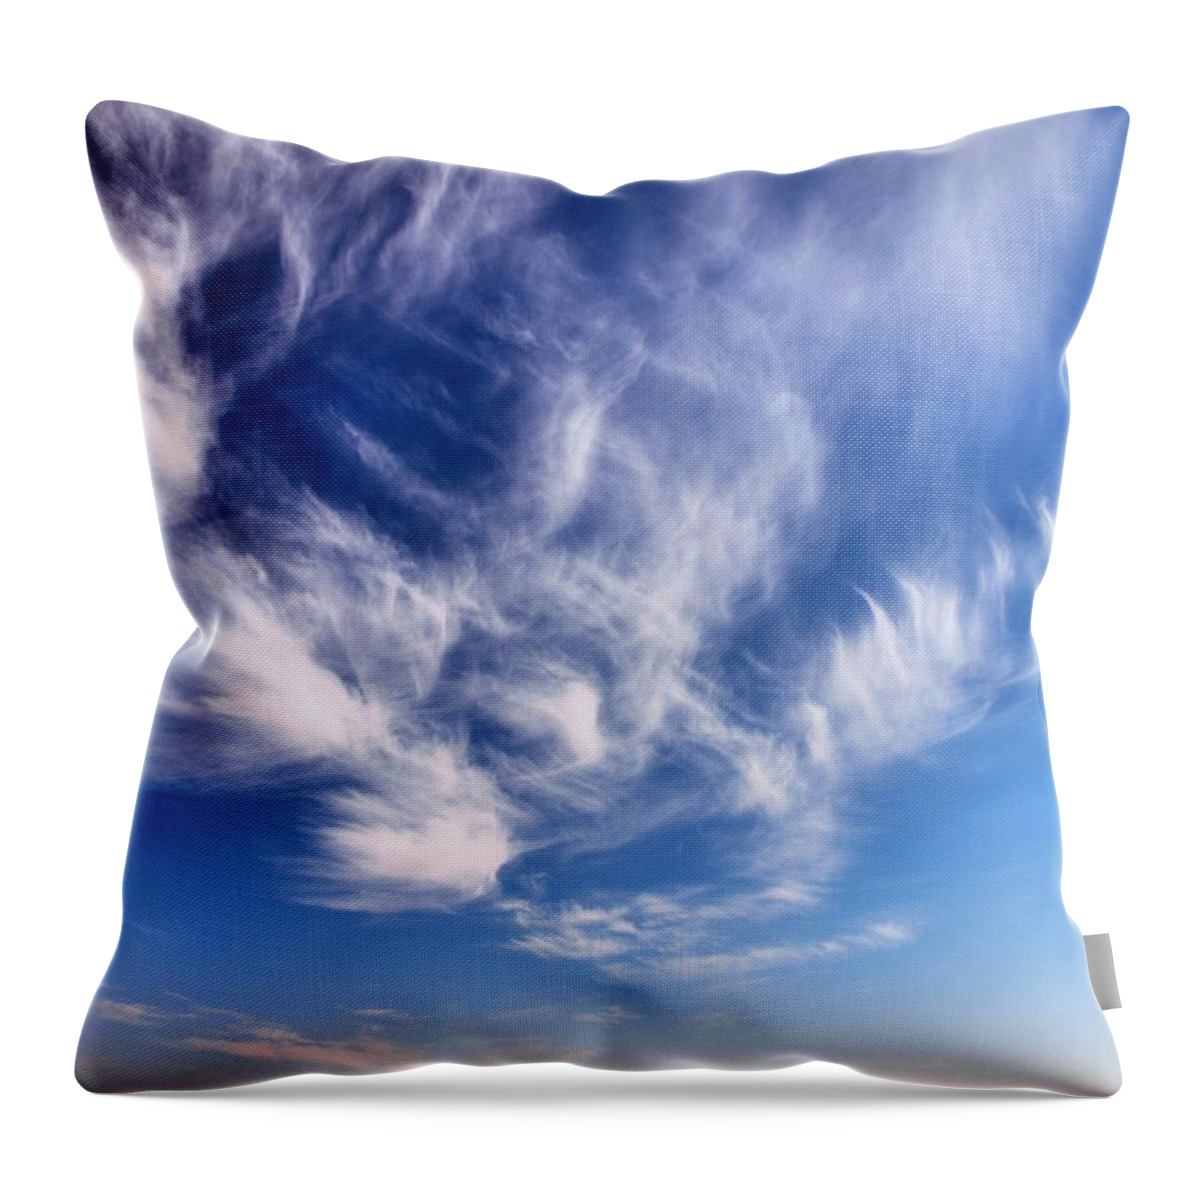 Clouds Throw Pillow featuring the photograph Whisper by Tom Druin